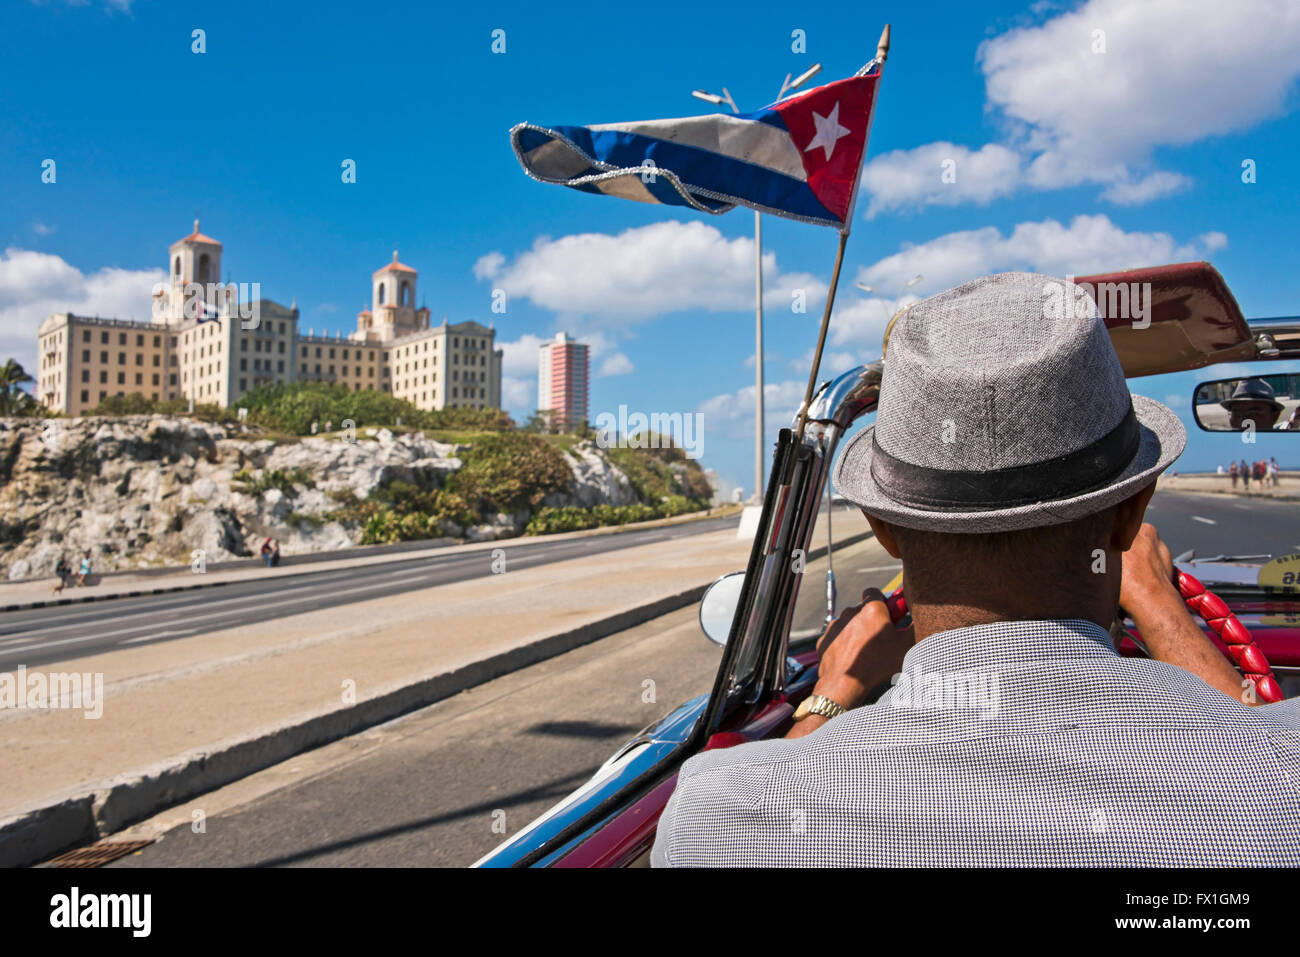 Horizontal view of the Hotel National from inside a classic American car in Havana, Cuba. Stock Photo